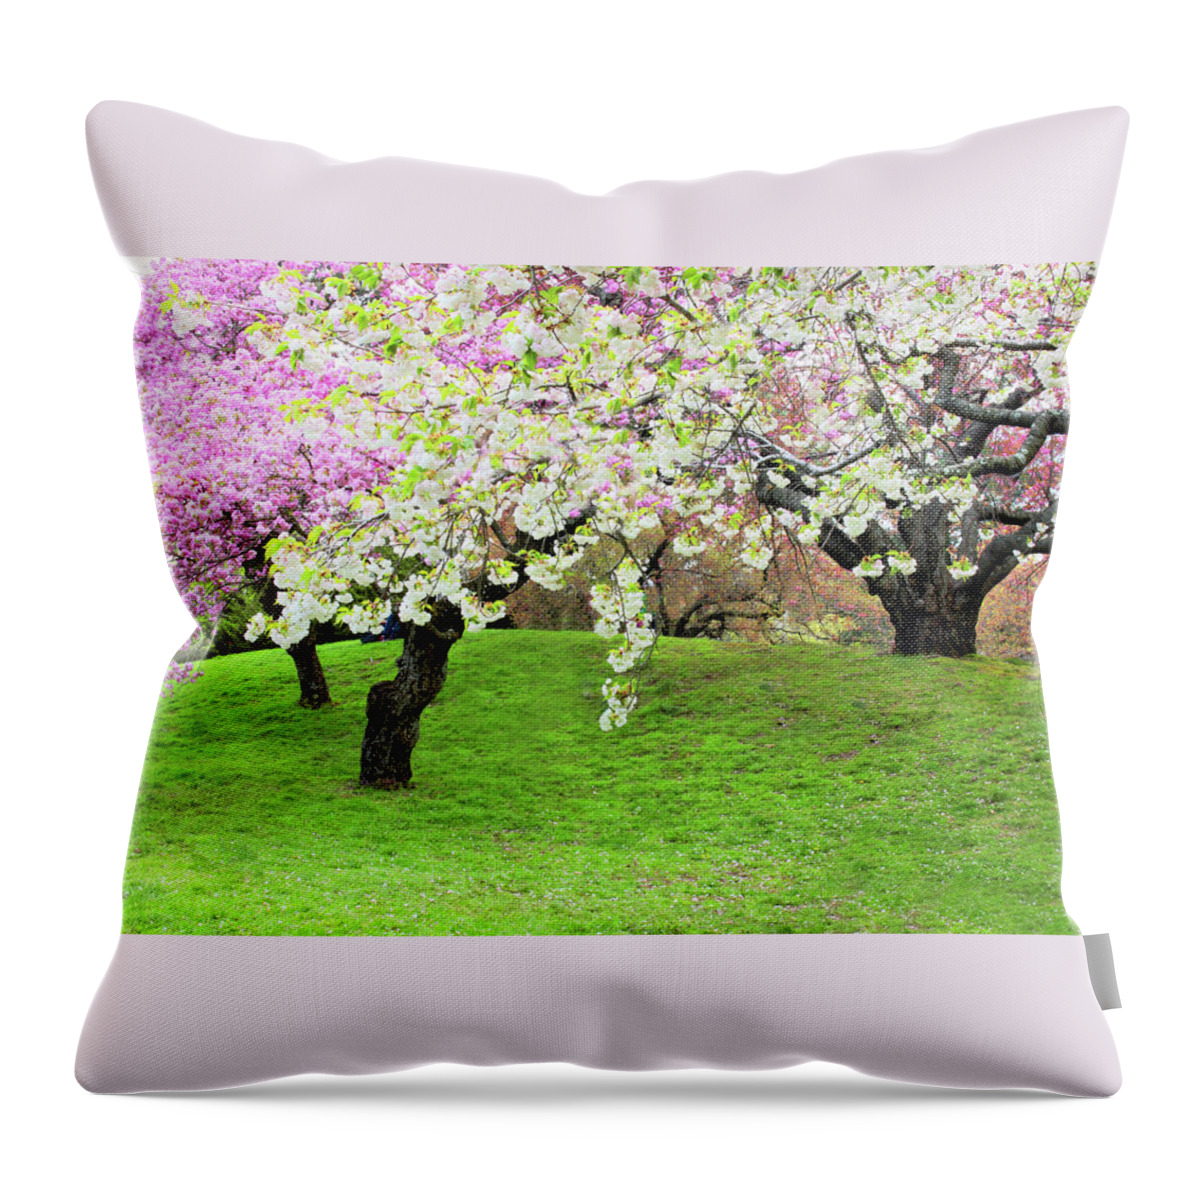 Cherry Trees Throw Pillow featuring the photograph Asian Inspired by Jessica Jenney